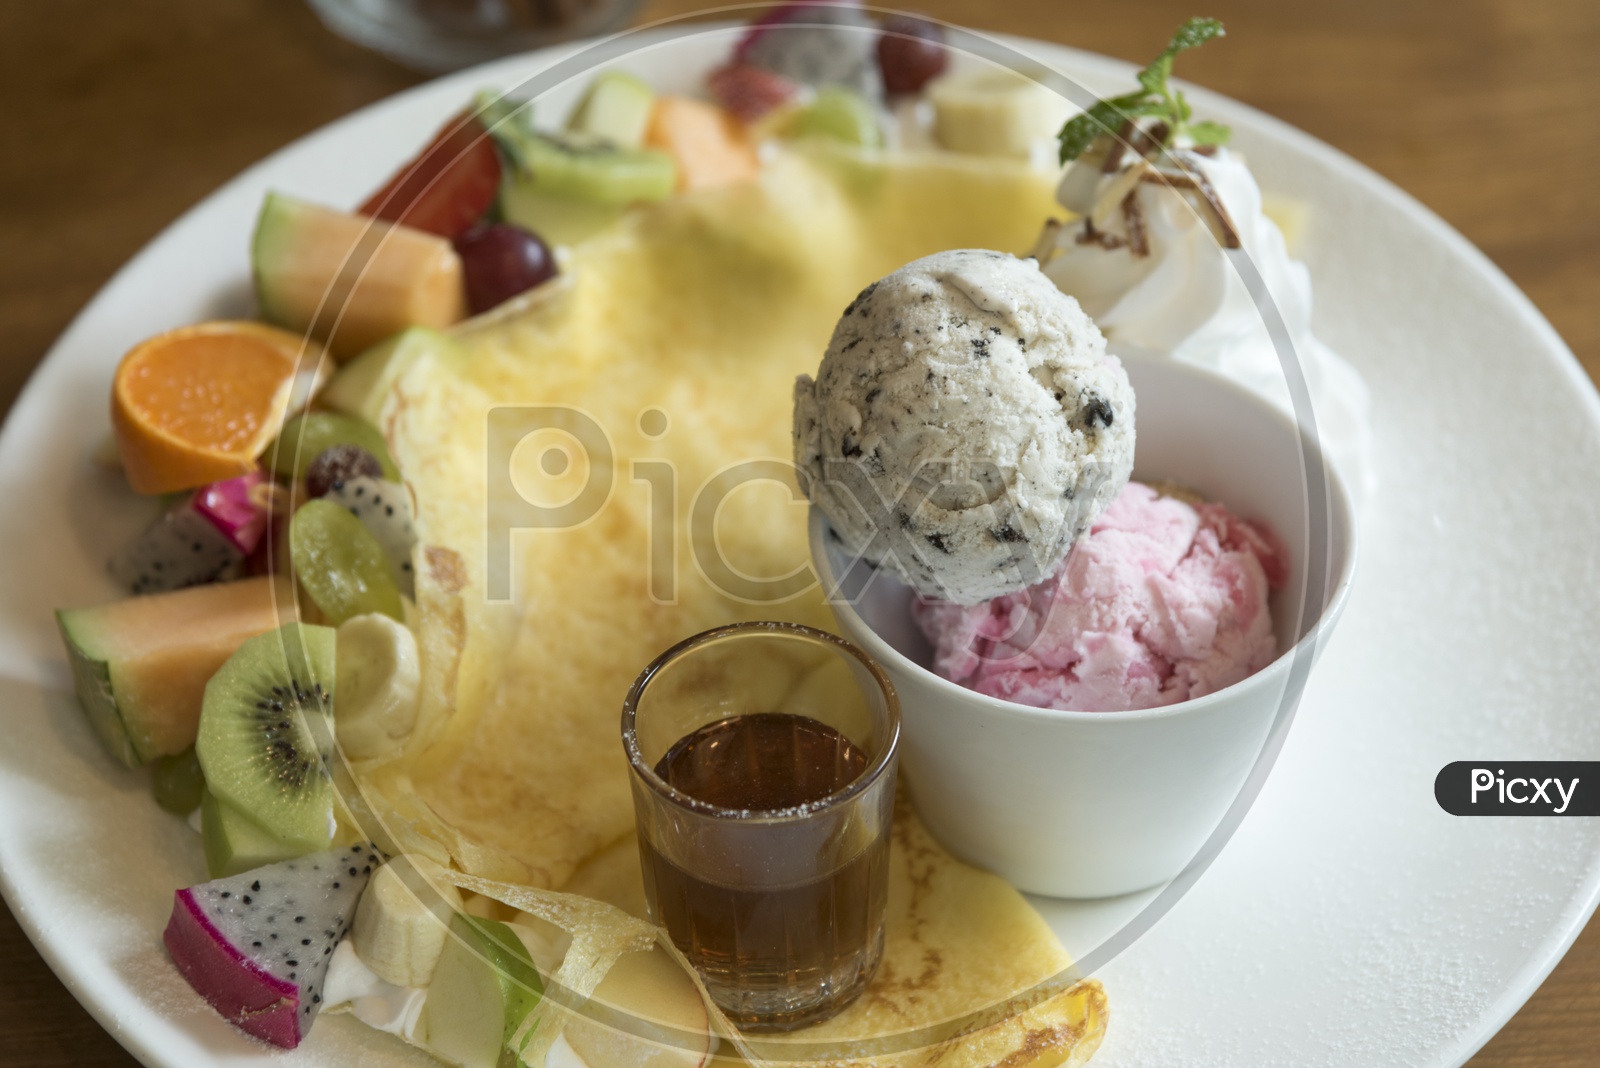 Crepe with ice cream served in a plate